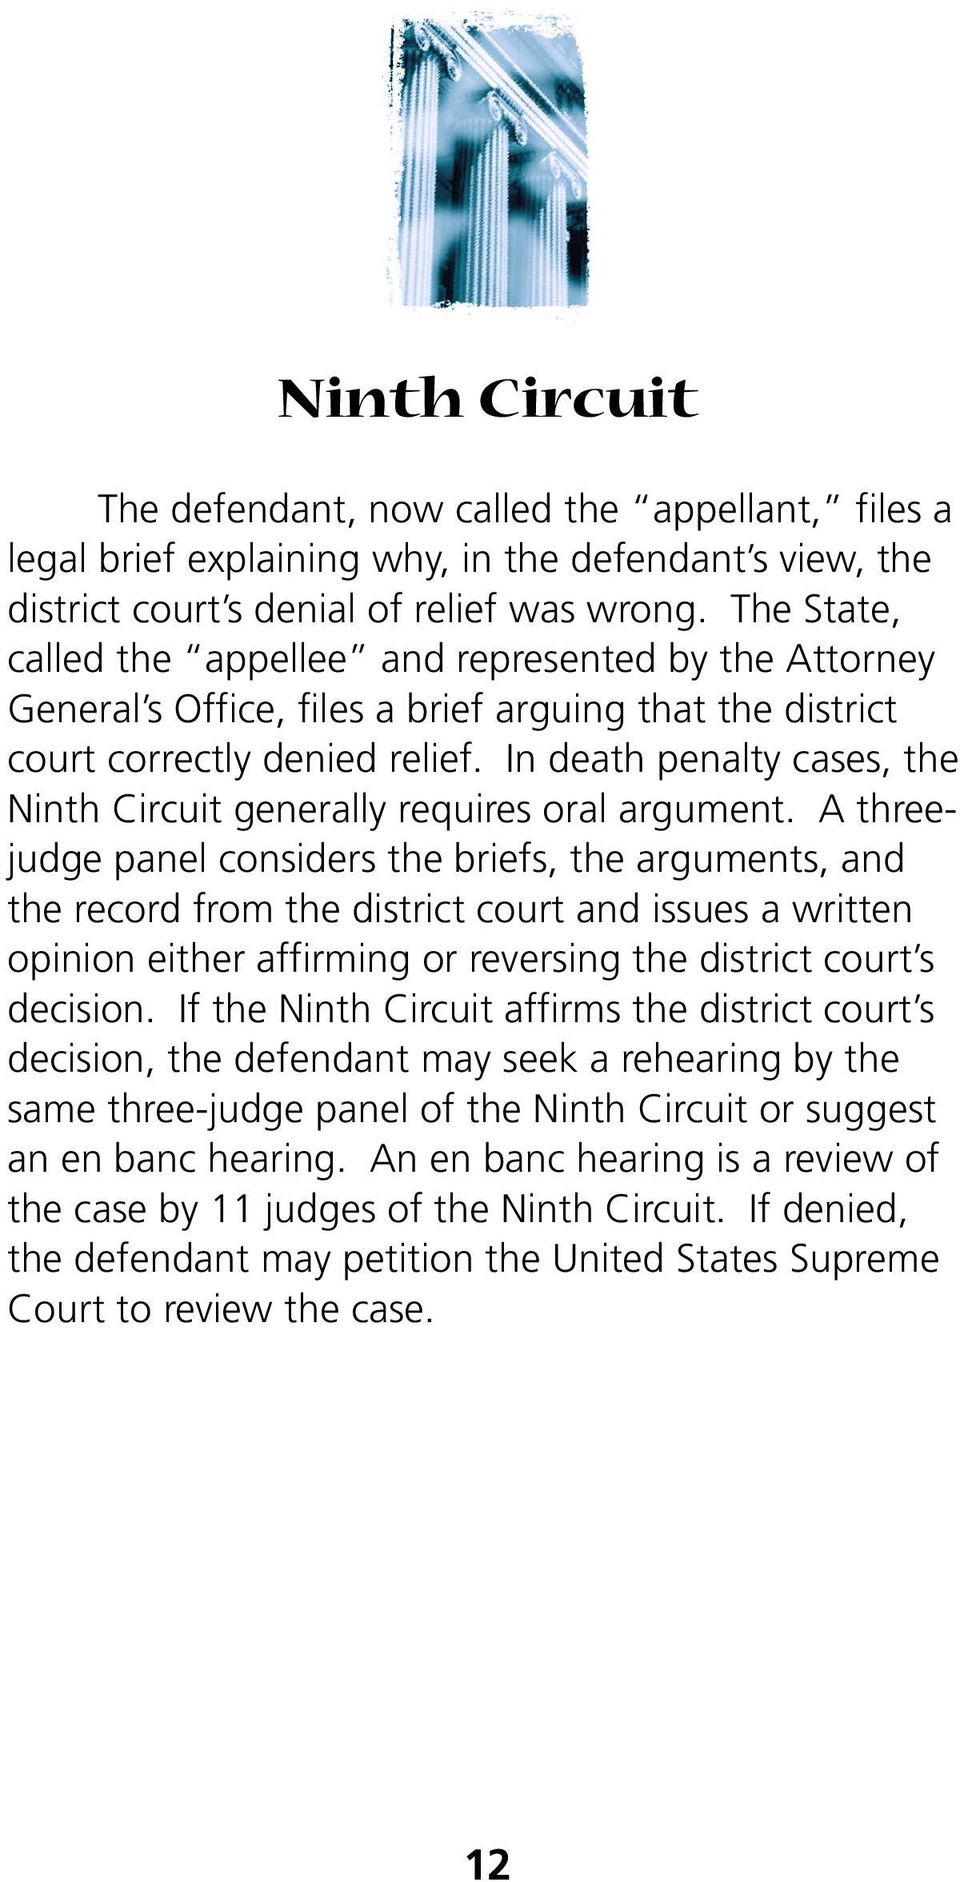 In death penalty cases, the Ninth Circuit generally requires oral argument.